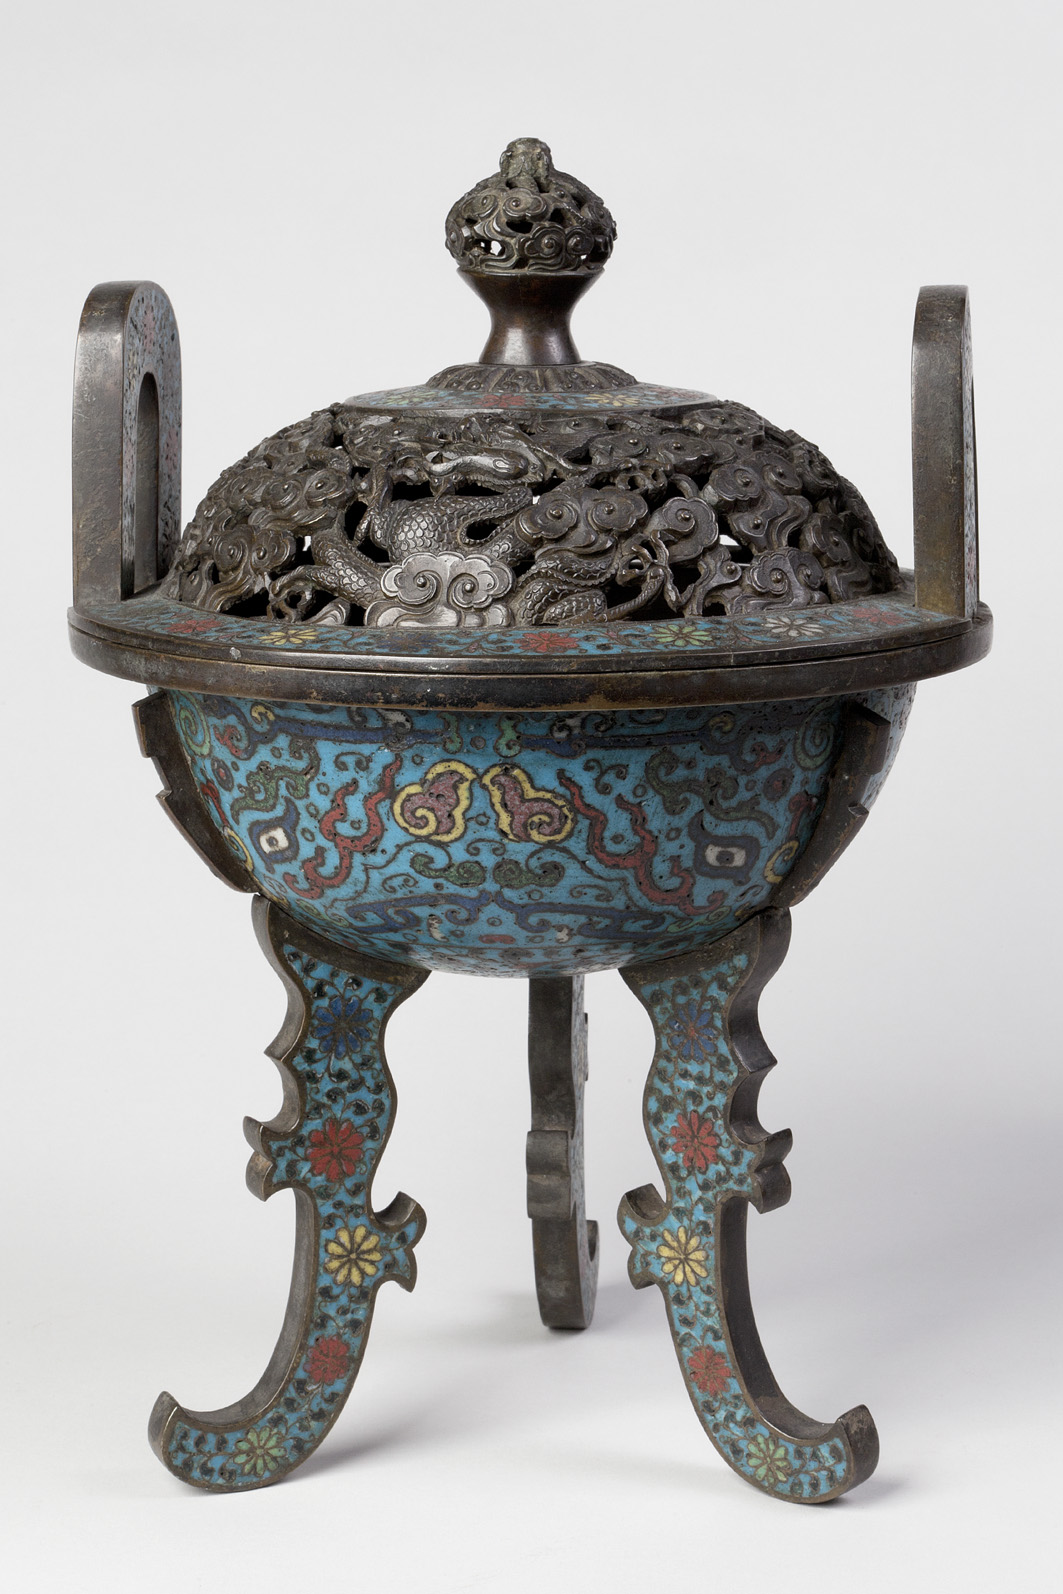 Chinese Cloisonné Enamel Tripod Censer with Pierced Cover. Qing Dynasty, Qianlong Period, 1736-1796. James Cromar Watt bequest, 1941. © Aberdeen City Council (Art Gallery and Museums Collections)